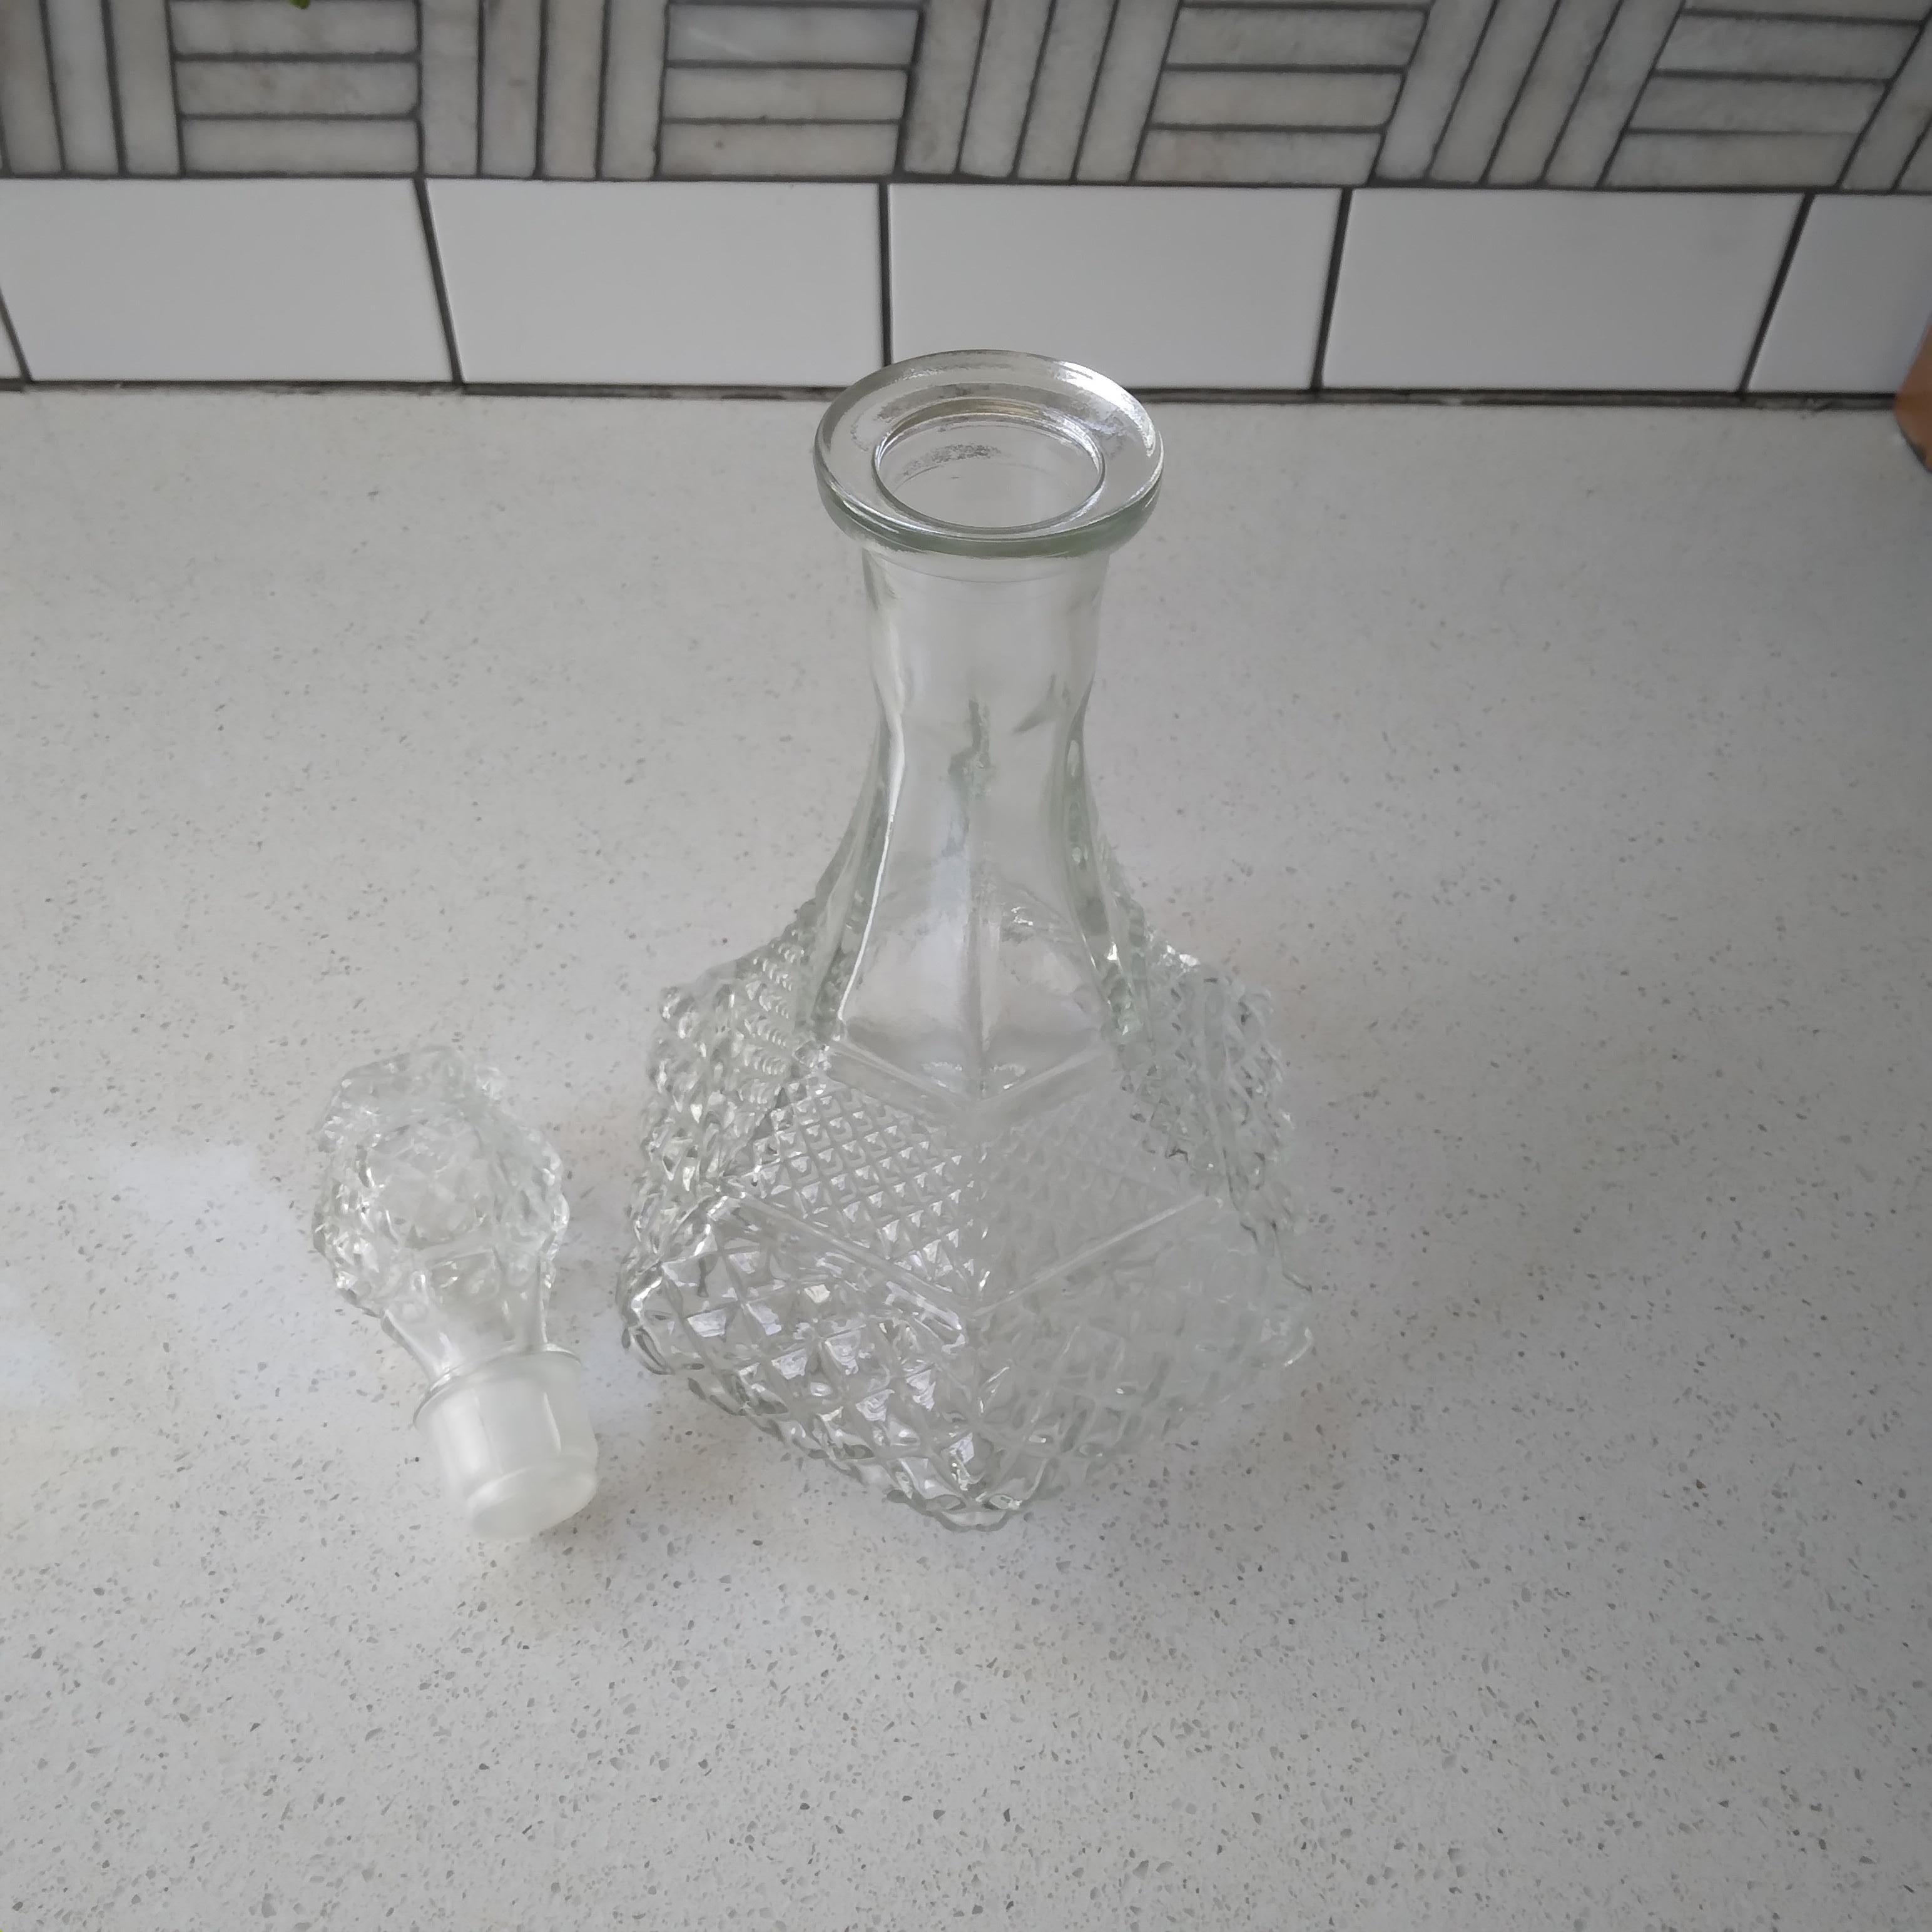 Beautifully faceted, this crystal (clear glass) wine decanter is quite mesmerizing. We love the Wexler diamond pattern, featuring two sizes of diamonds at the generous, square base. The top culminates in a removable flower shaped stopper.

The thick